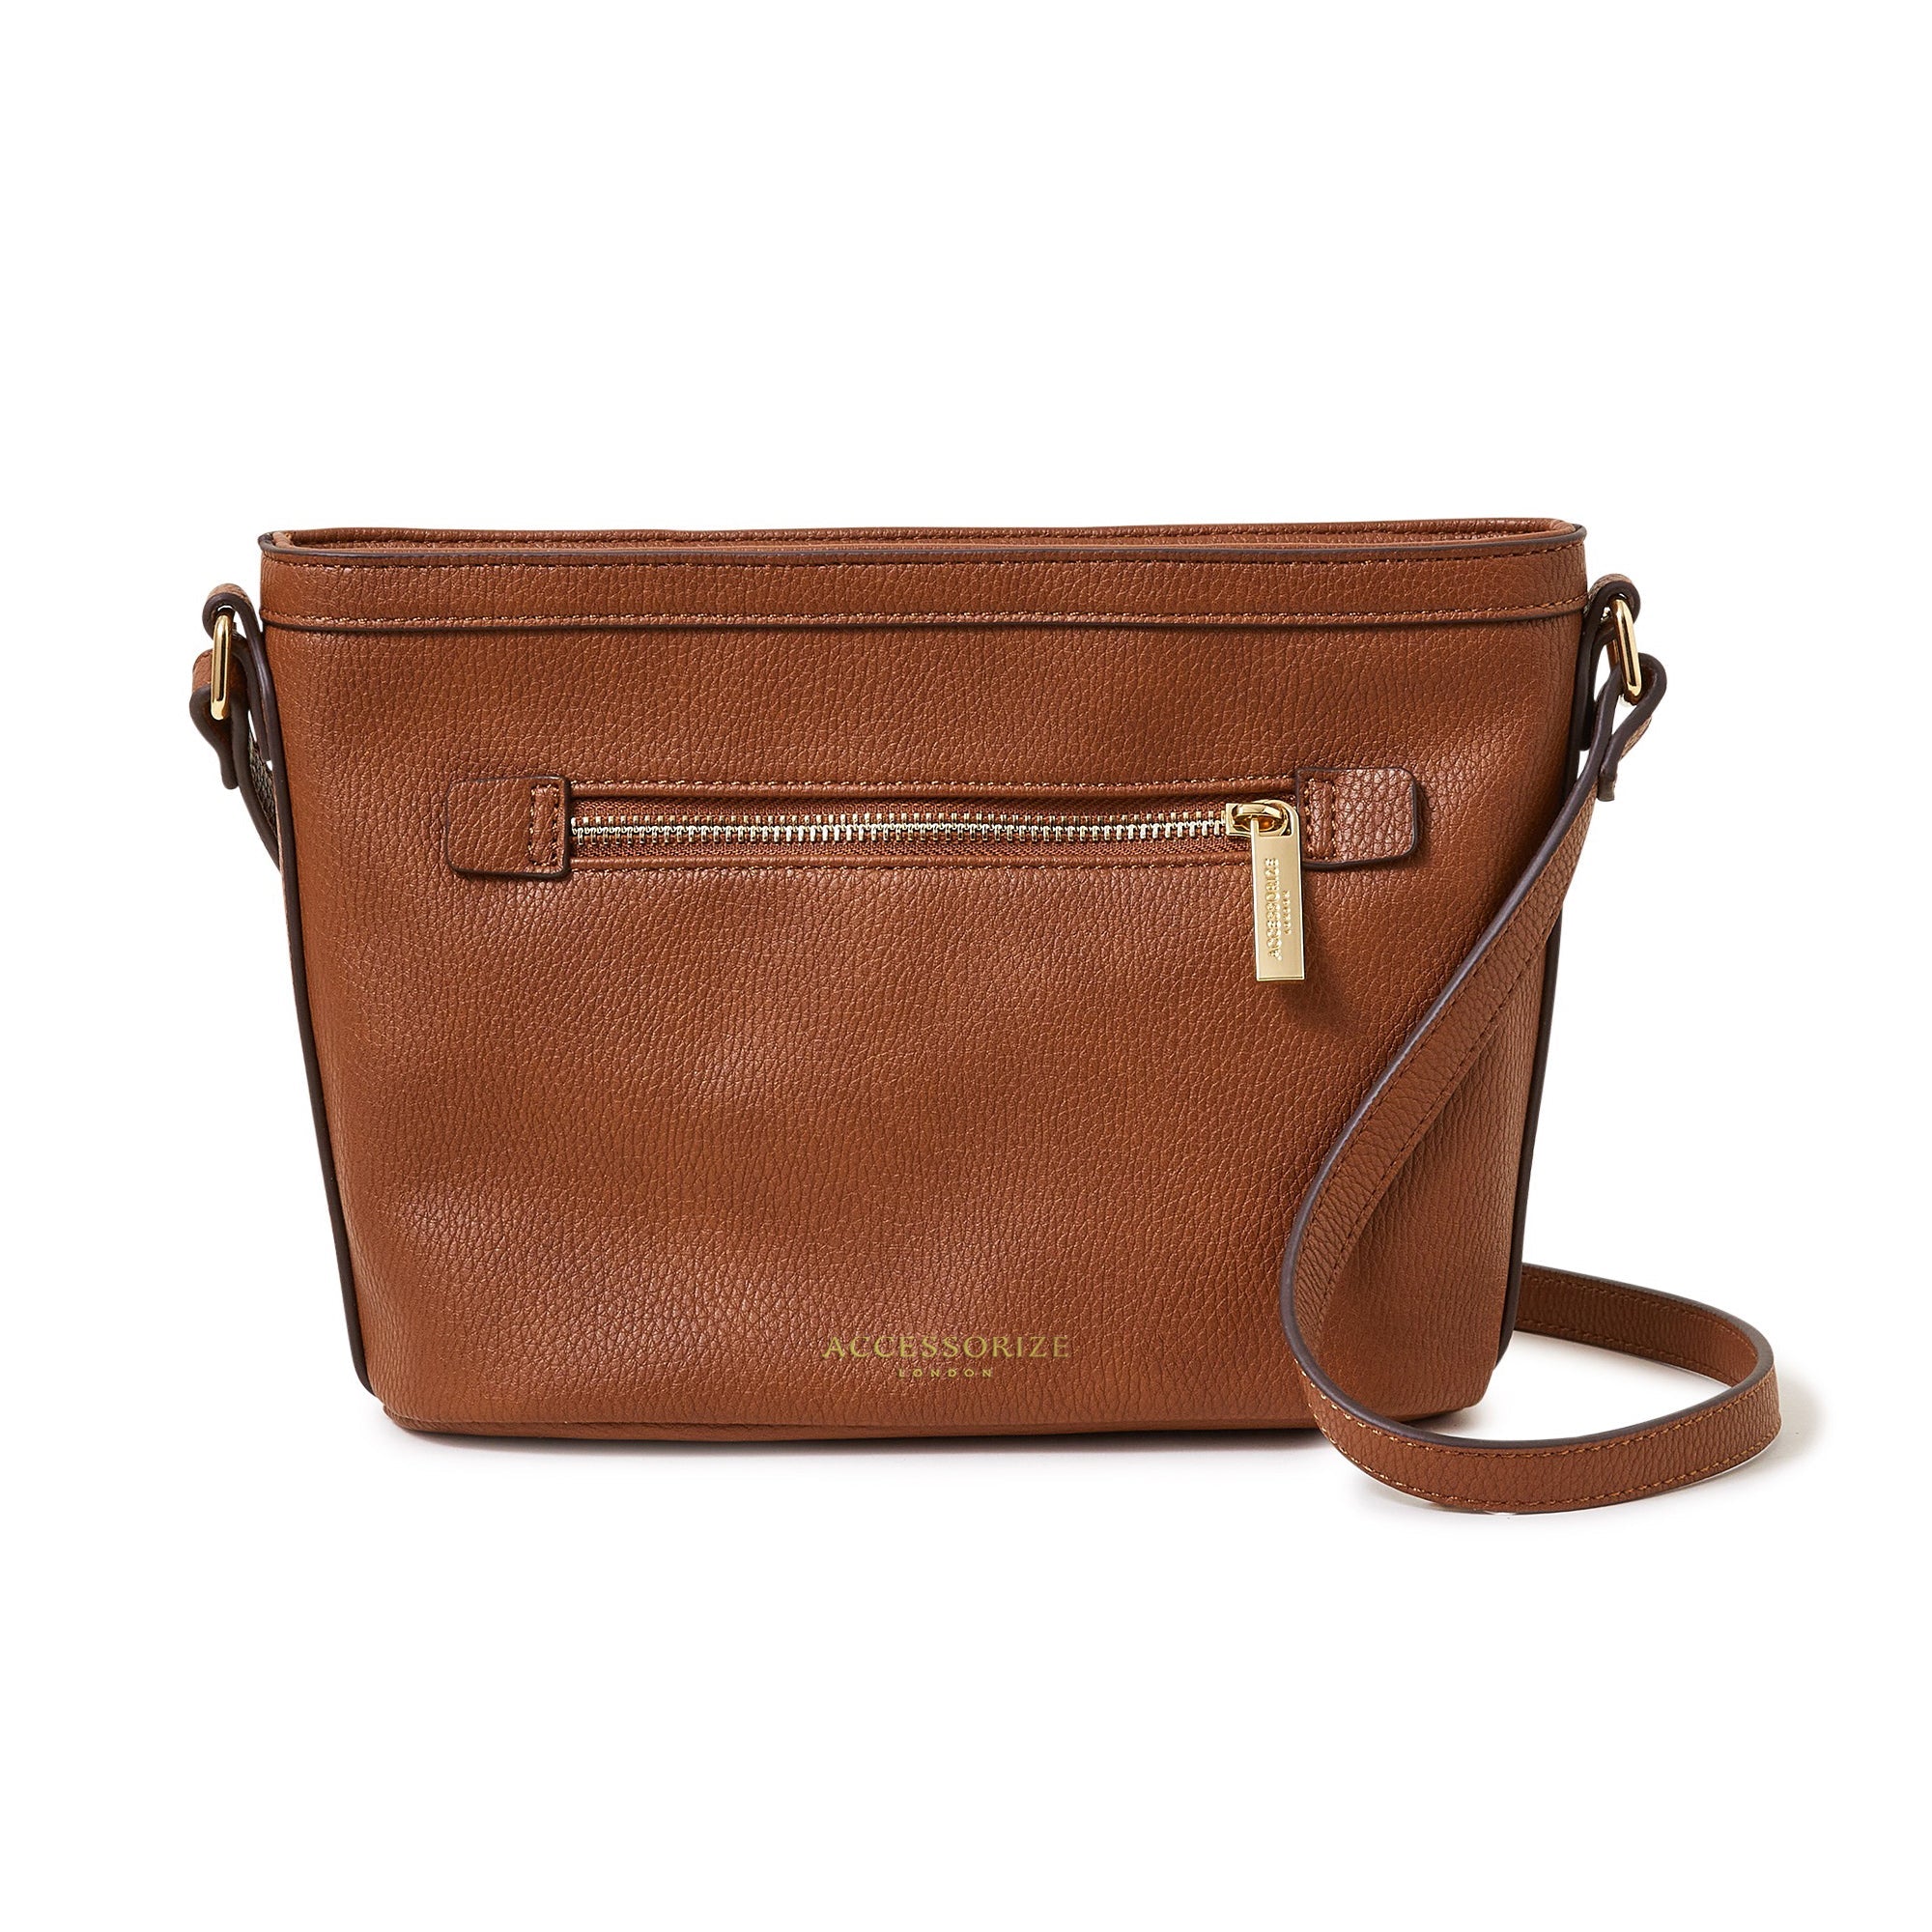 Accessorize London Women's Faux Leather Brown Top Zip Sling Bag